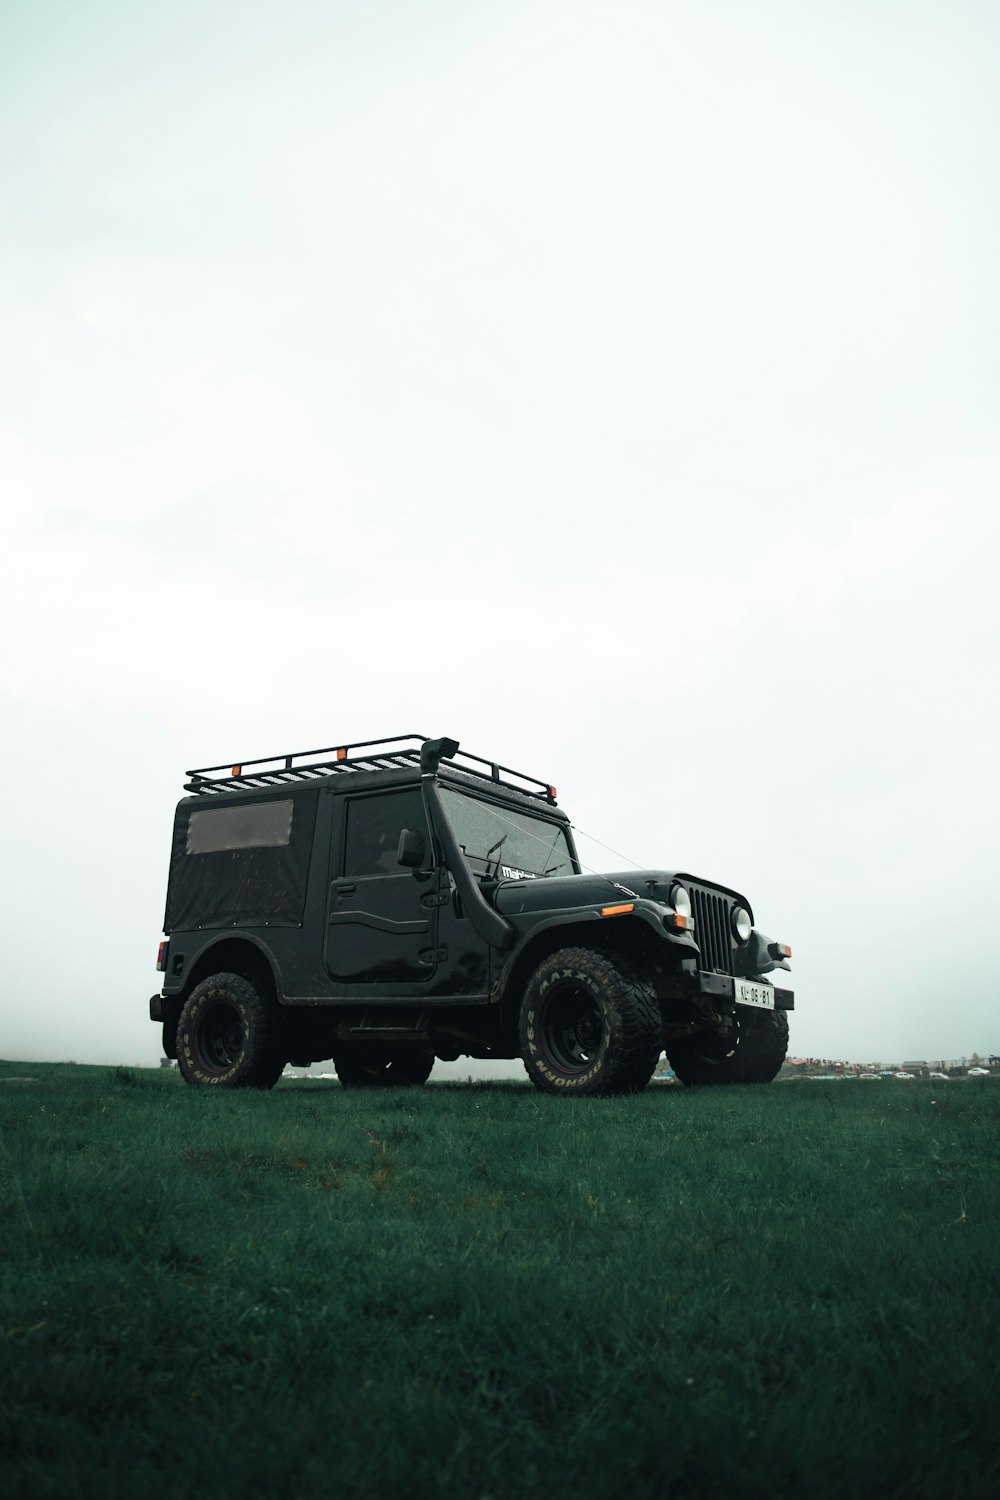 Mahindra Thar Pictures | Download Free Images on Unsplash